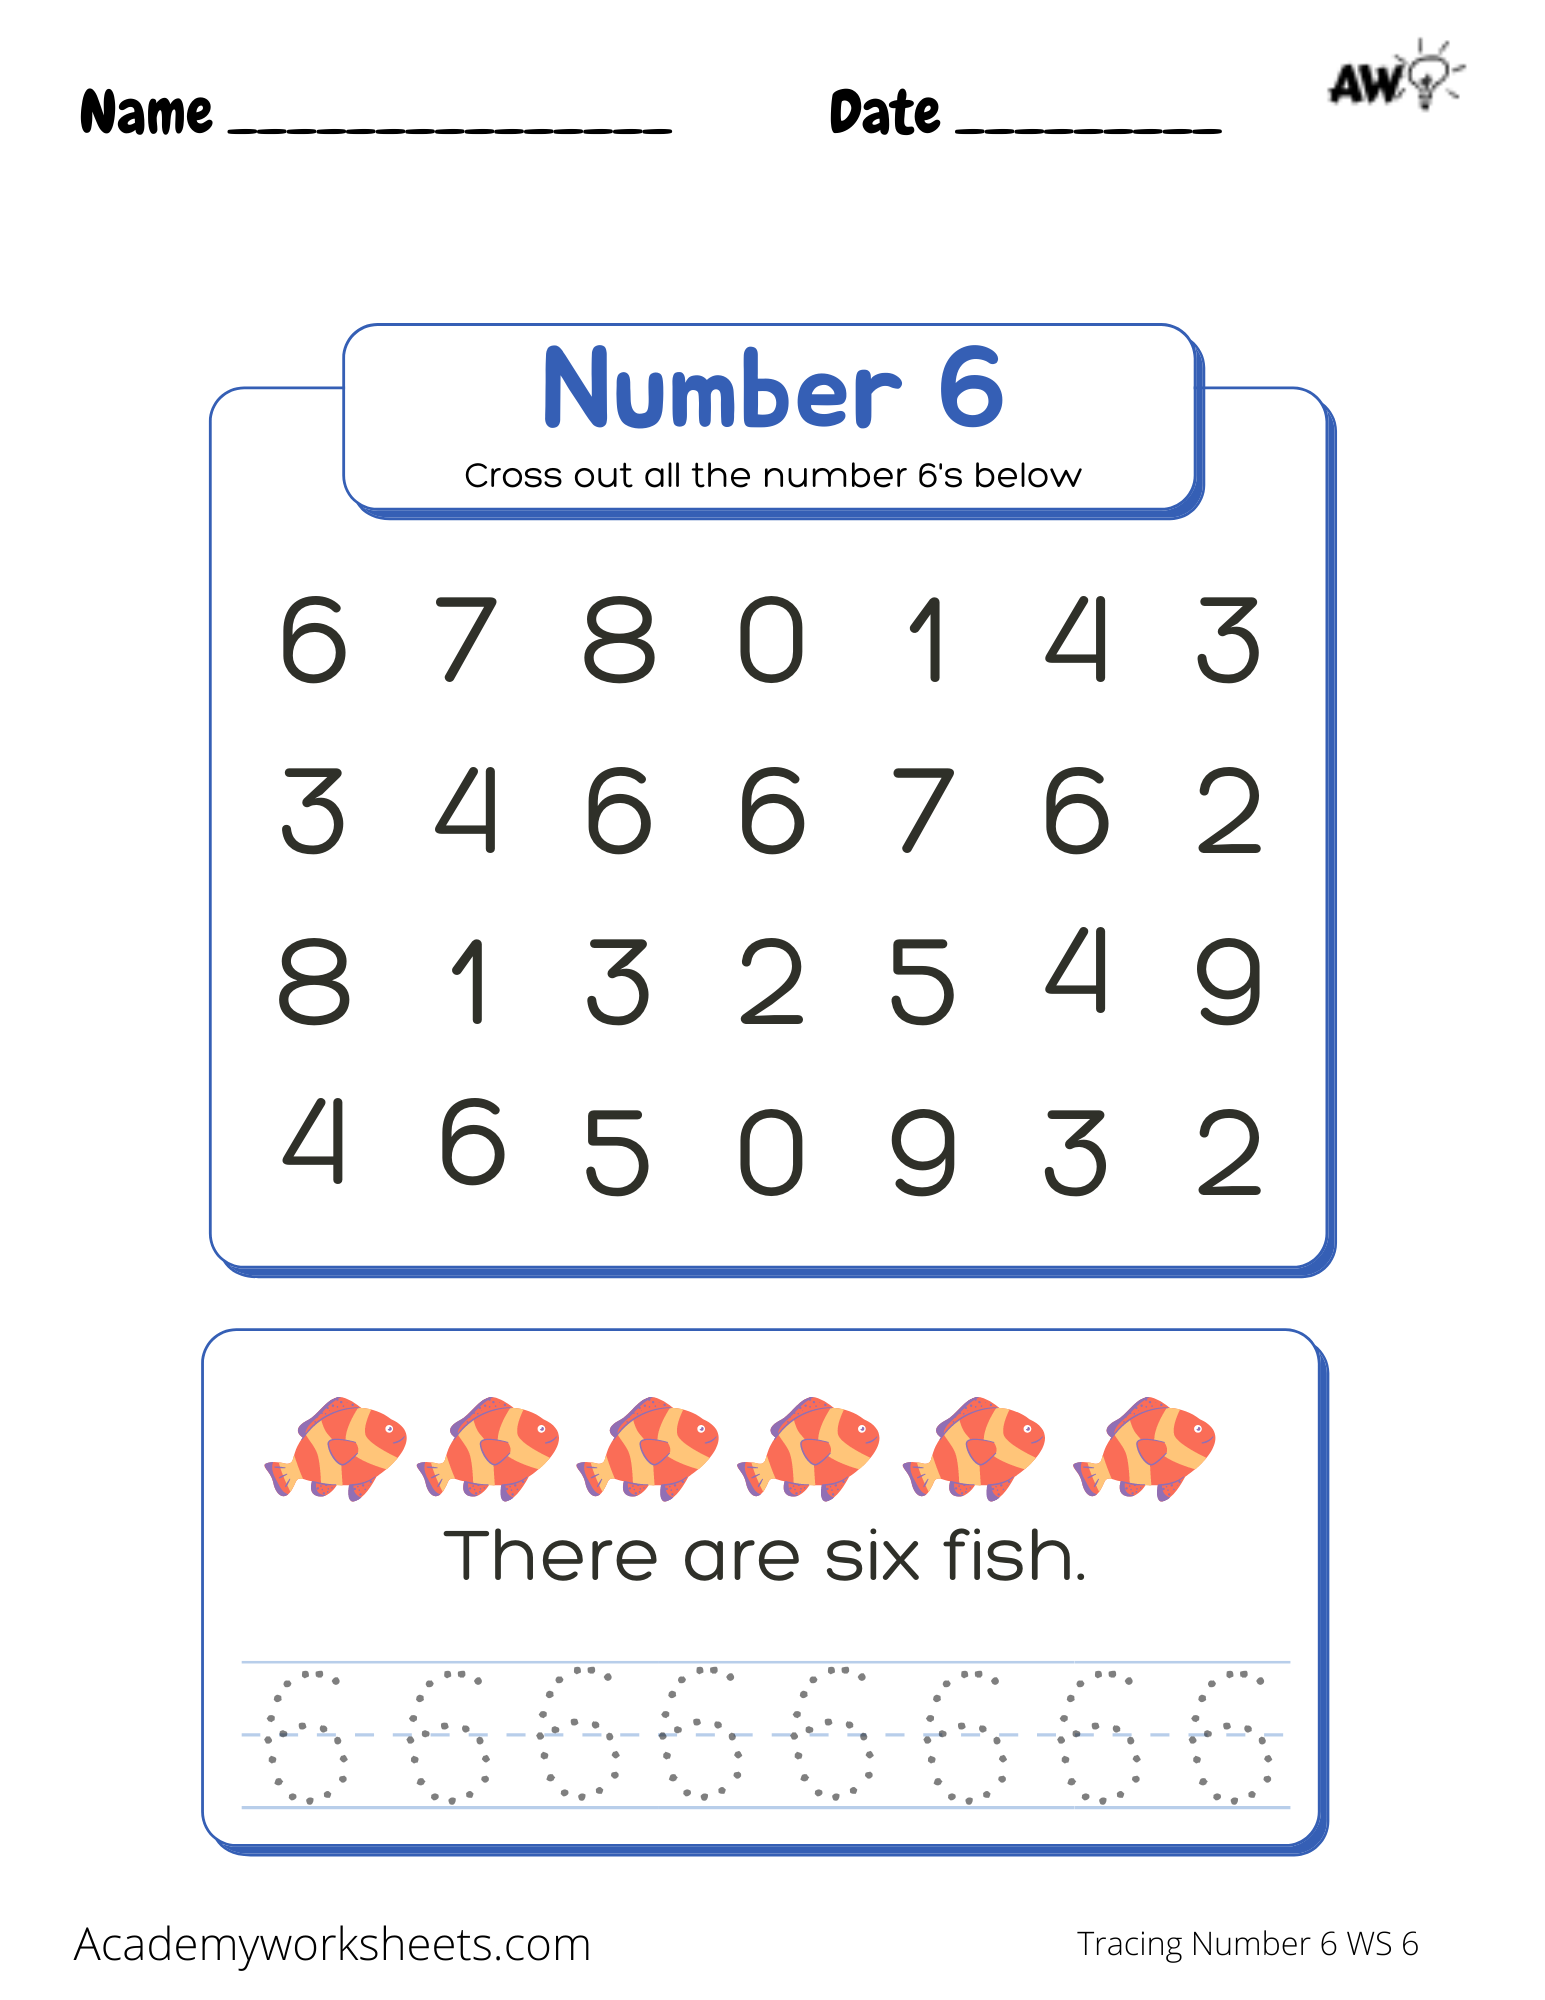 Learning The Number 6 - Tracing - Academy Worksheets